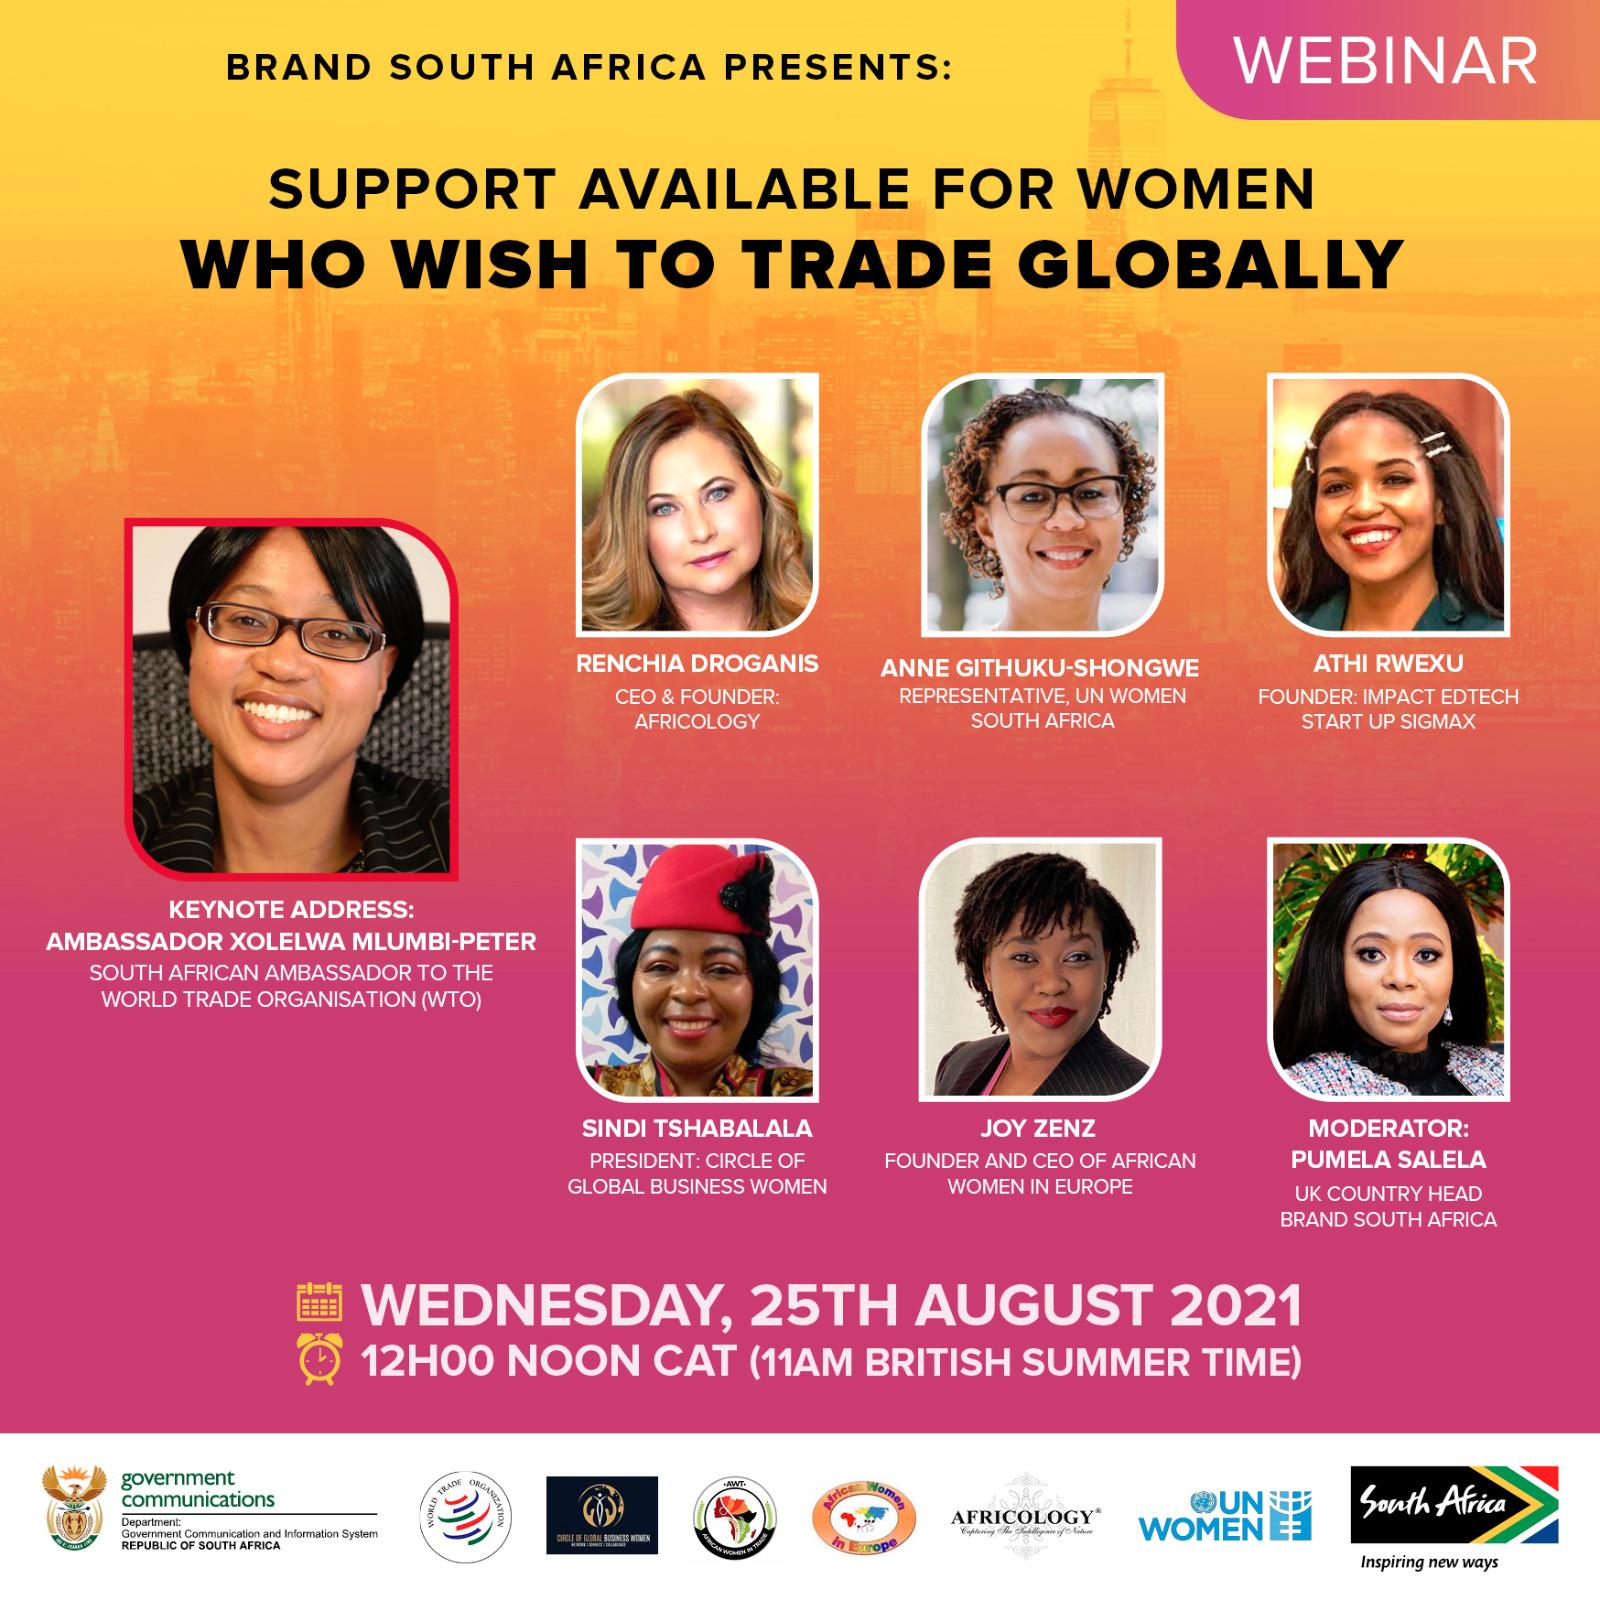 Webinar: Support for Women Who Wish to Trade Globally